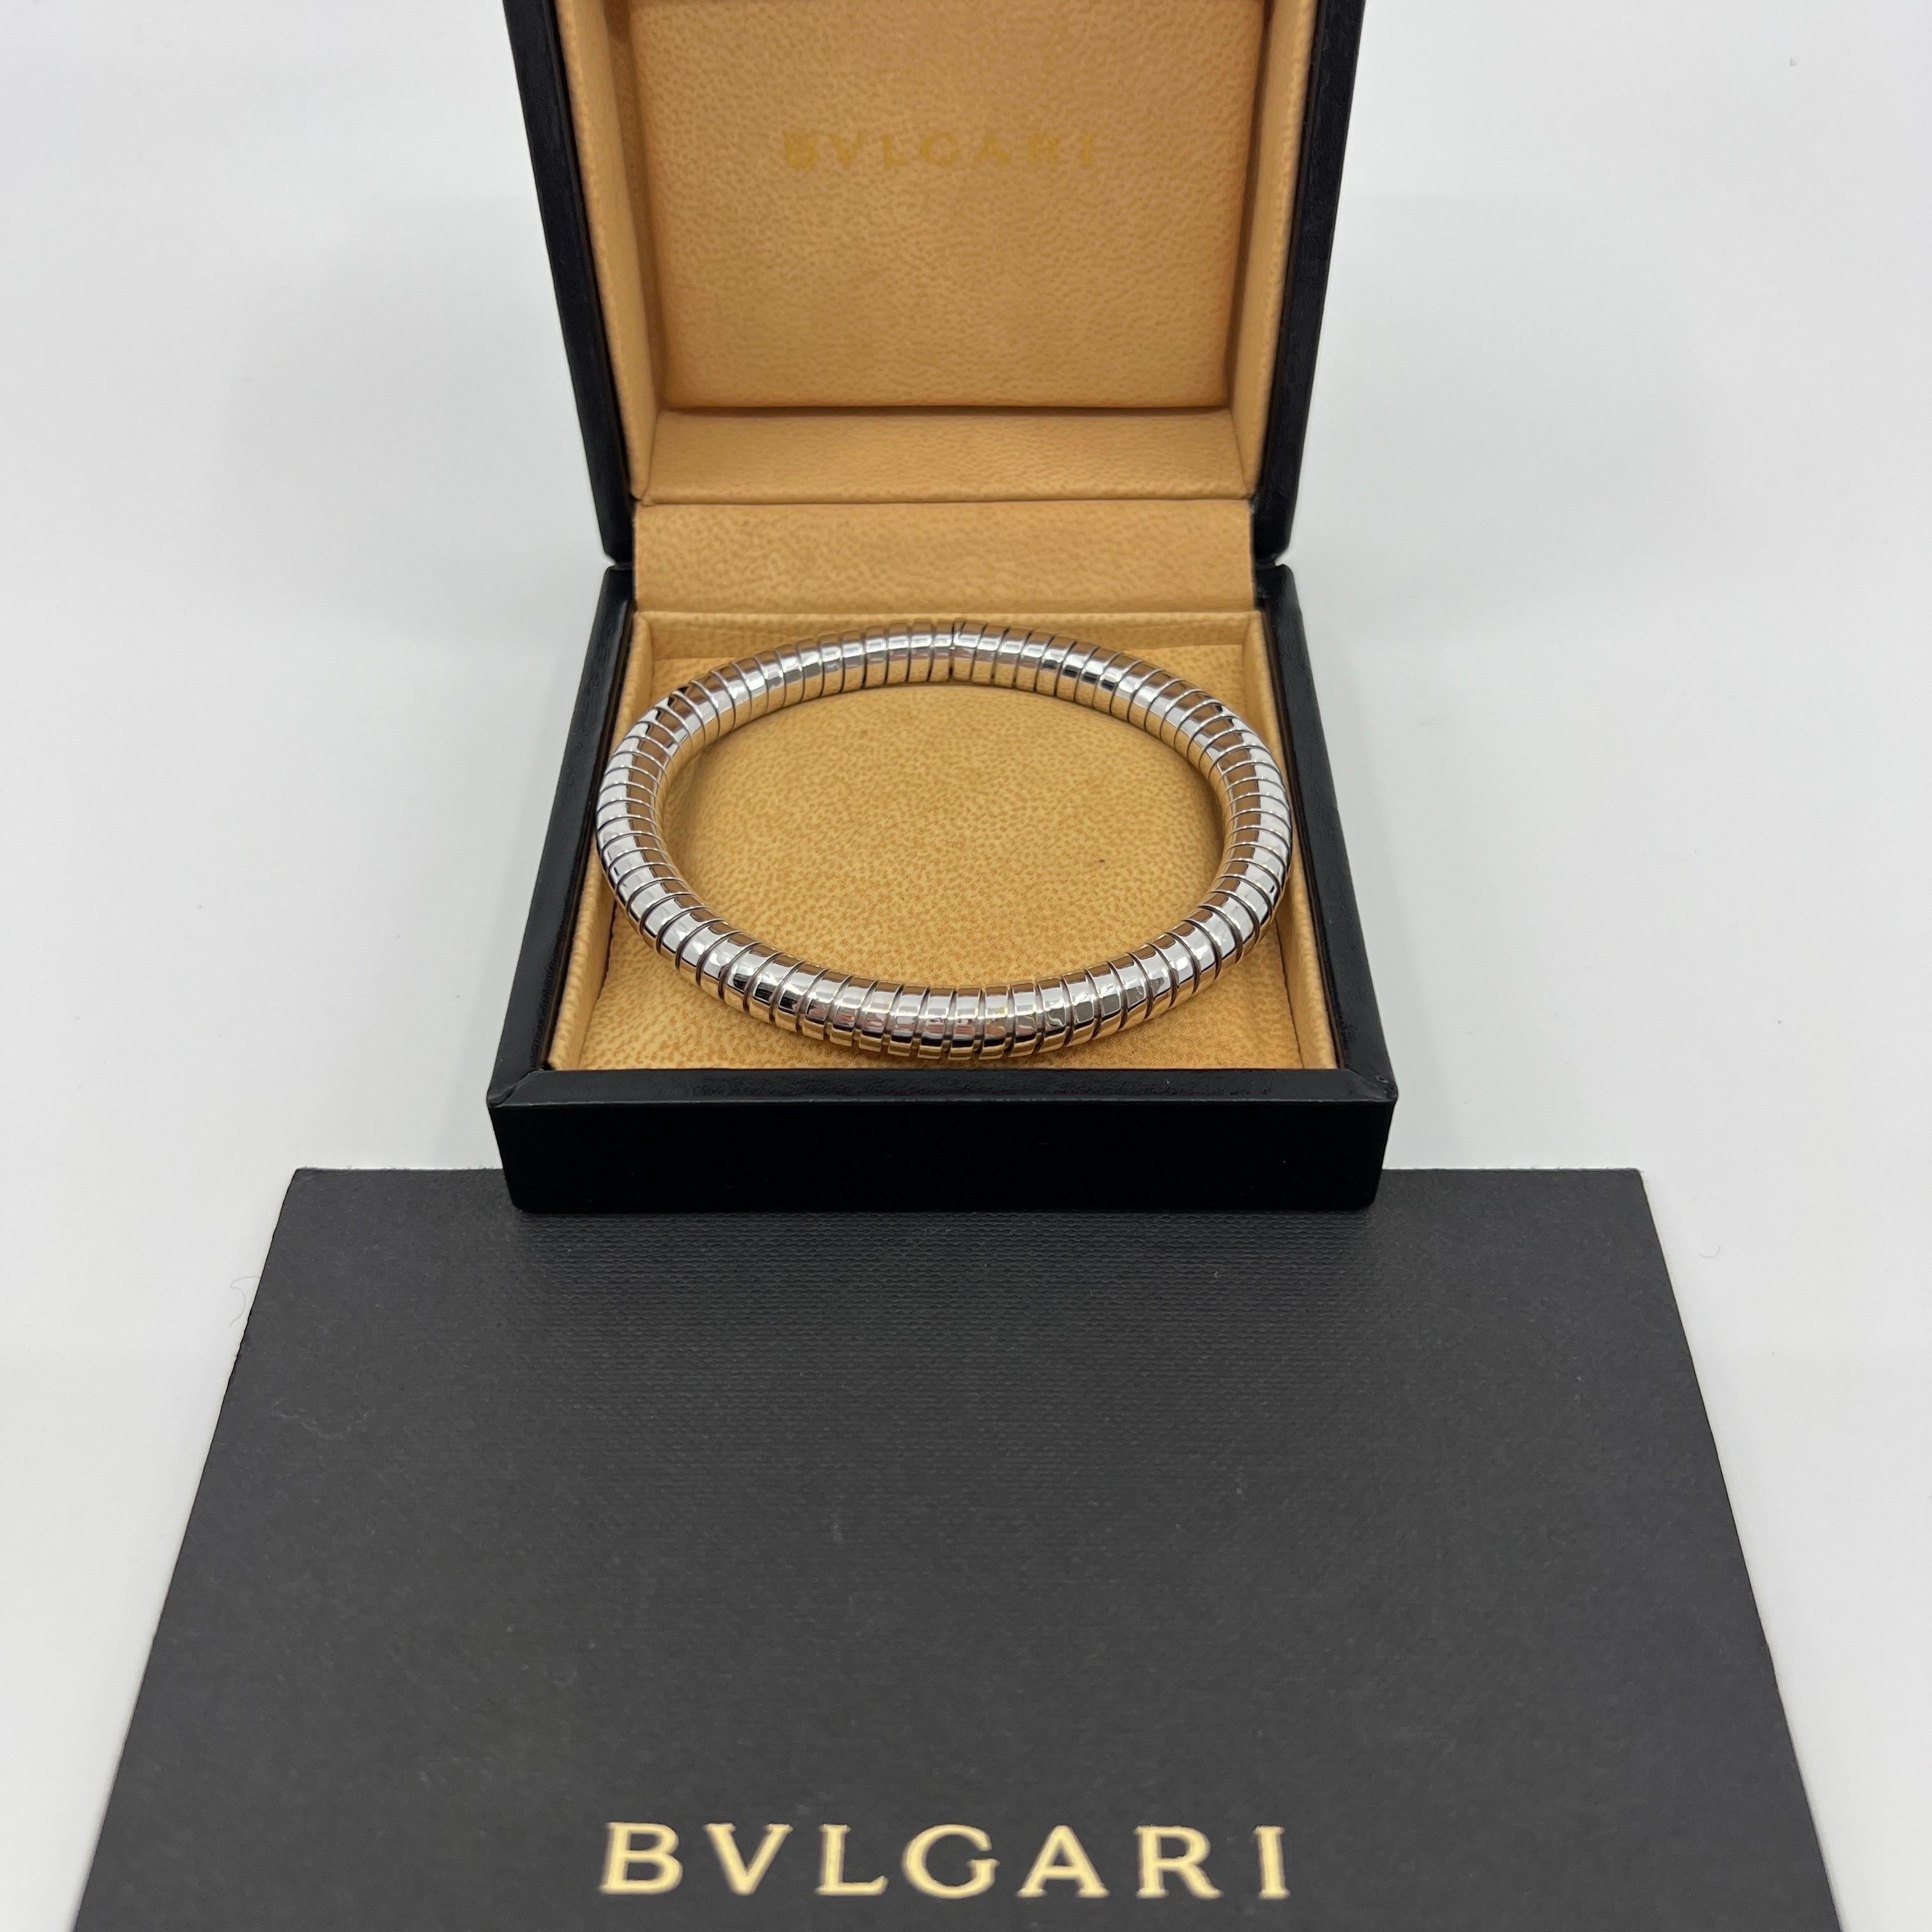 Very Rare Vintage Bvlgari Tubogas 18k White Gold Bracelet Bangle

Stunning Bvlgari bracelet with signature Tubogas Parentesi style. The origins of the Serpenti collection from Bvlgari.
This bracelet has a solid white gold flexible body (including